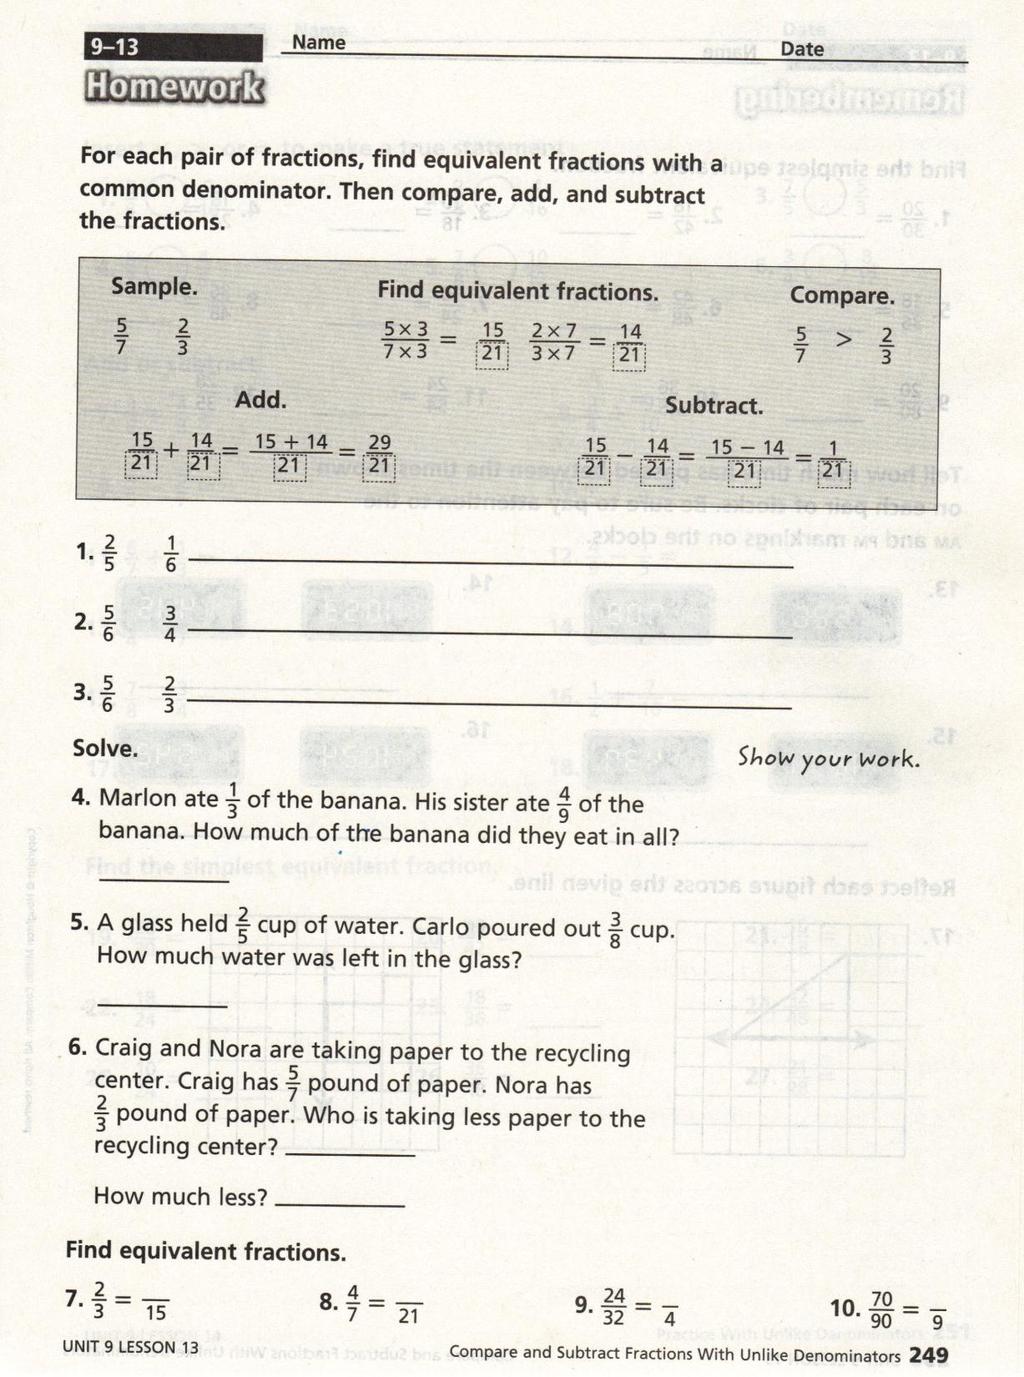 4 th Grade Homework: Homework provides clear directions along with